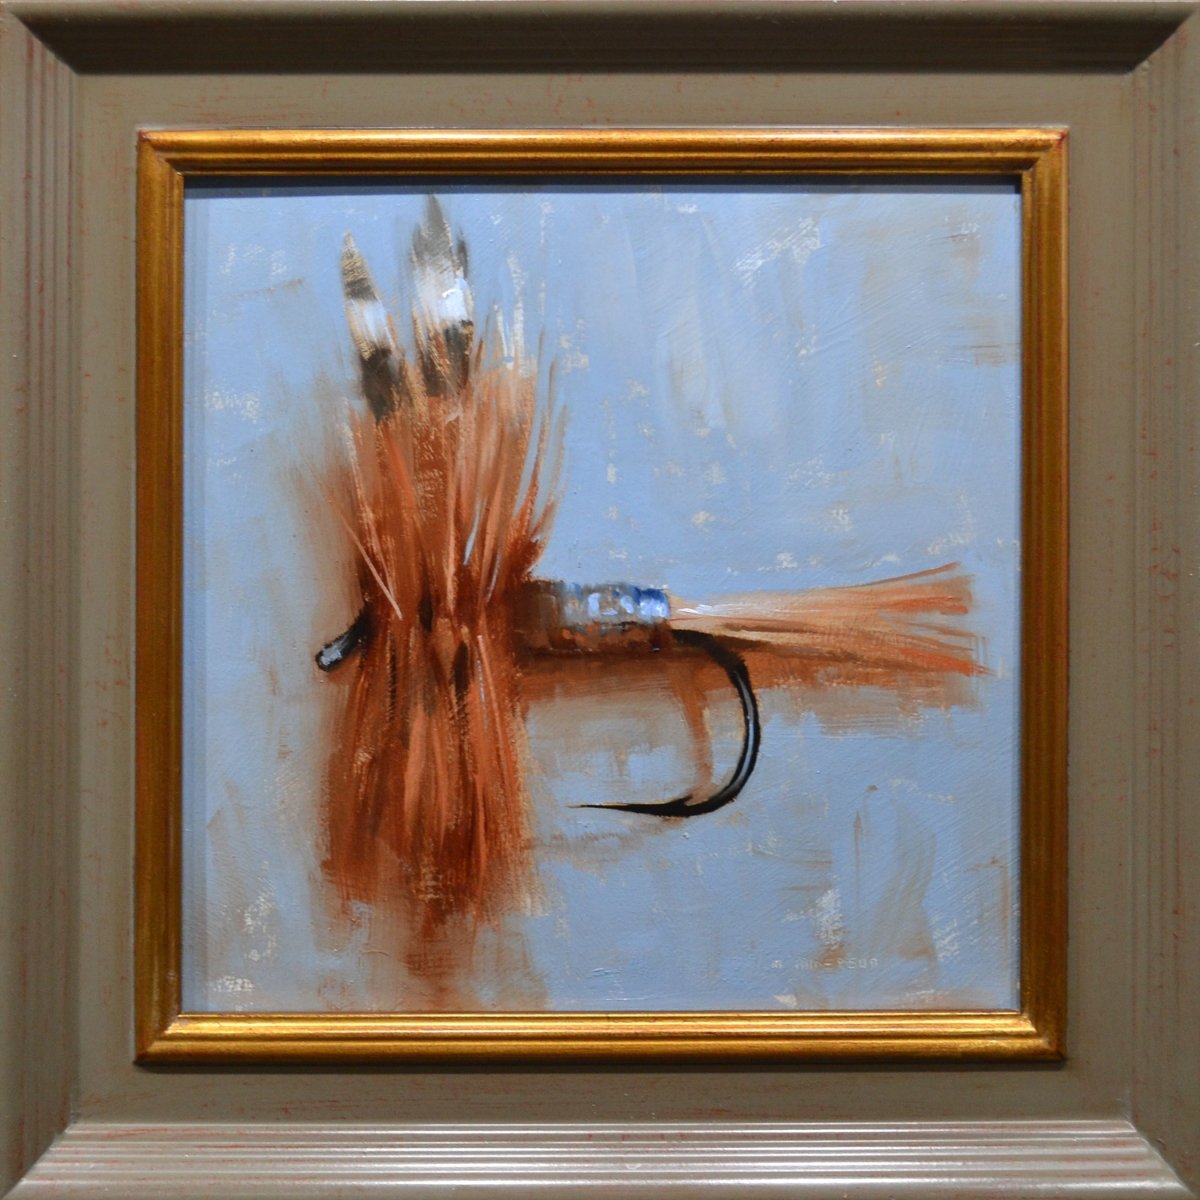 Adams Fly by Marc Anderson at LePrince Galleries